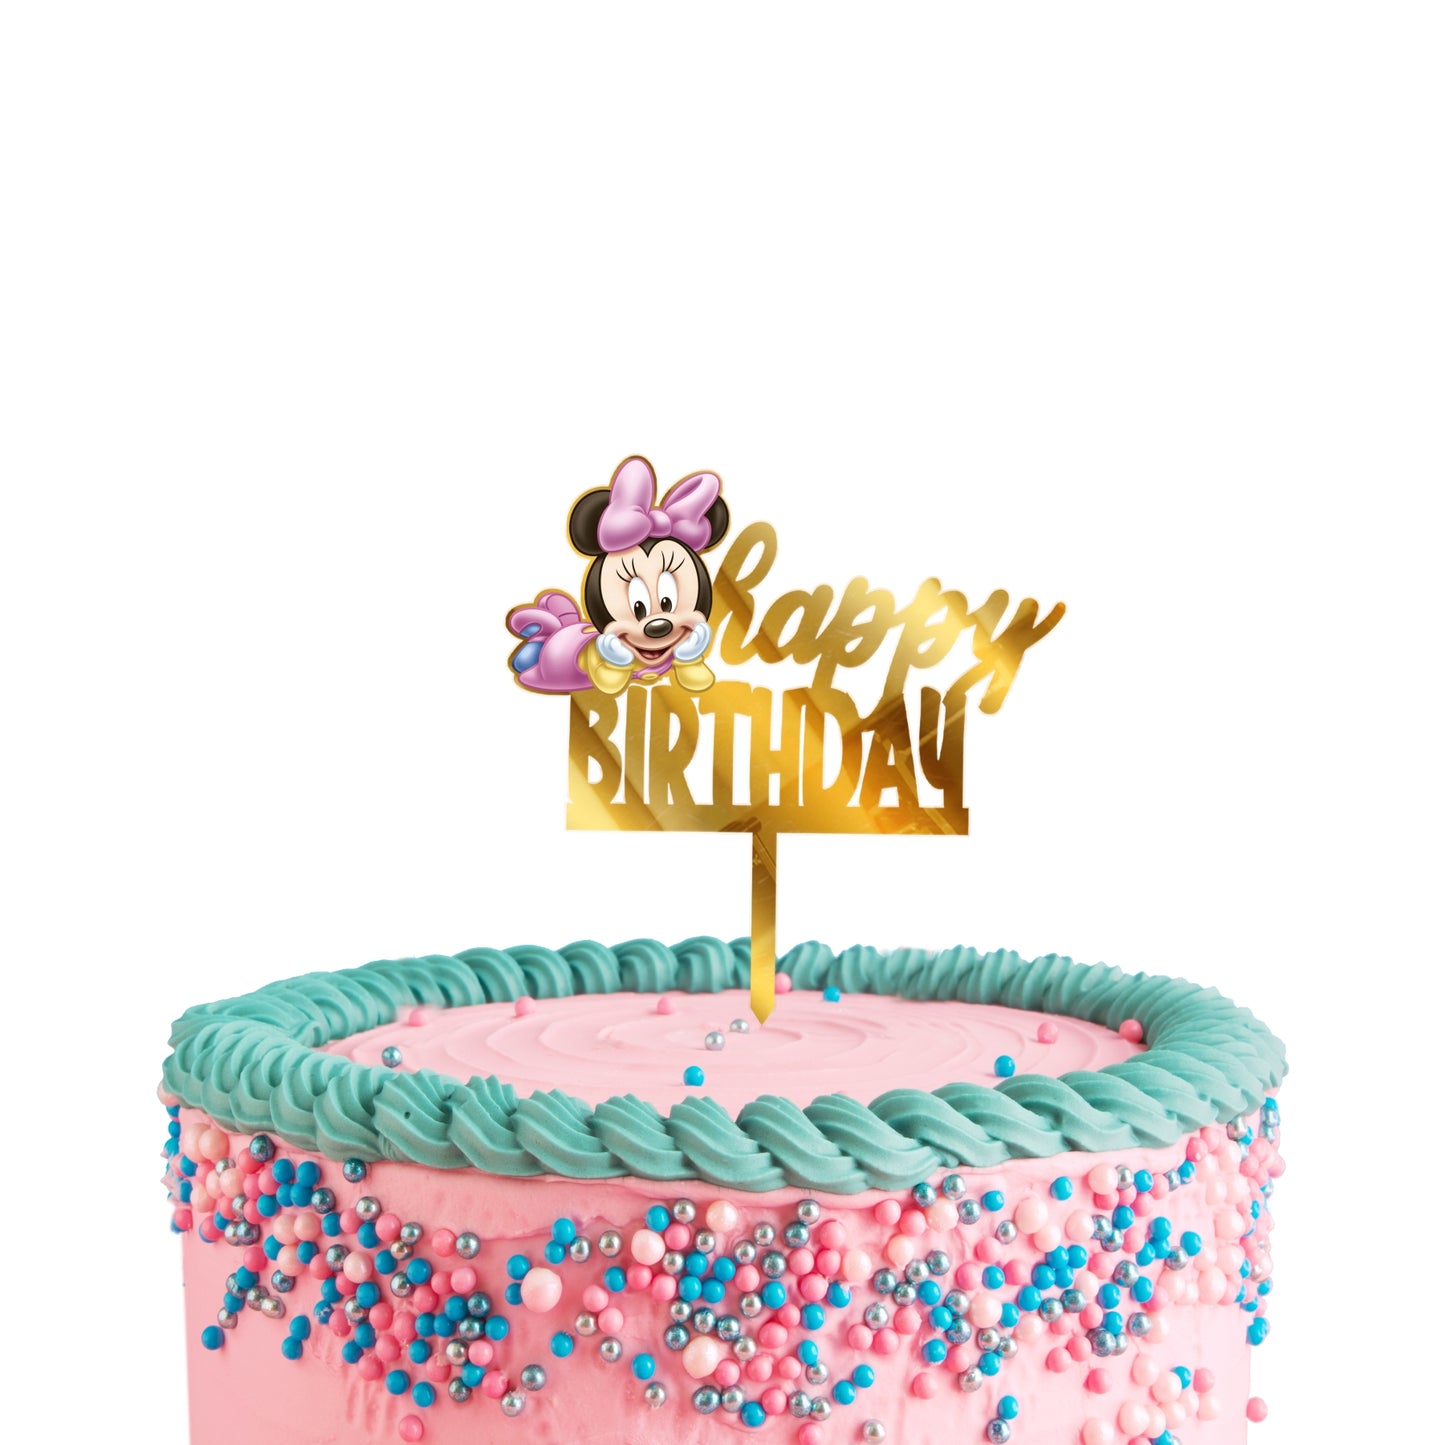 Cake Toppers Happy Birthday Minnie Mouse Acrylic Cake Toppers Golden Toppers